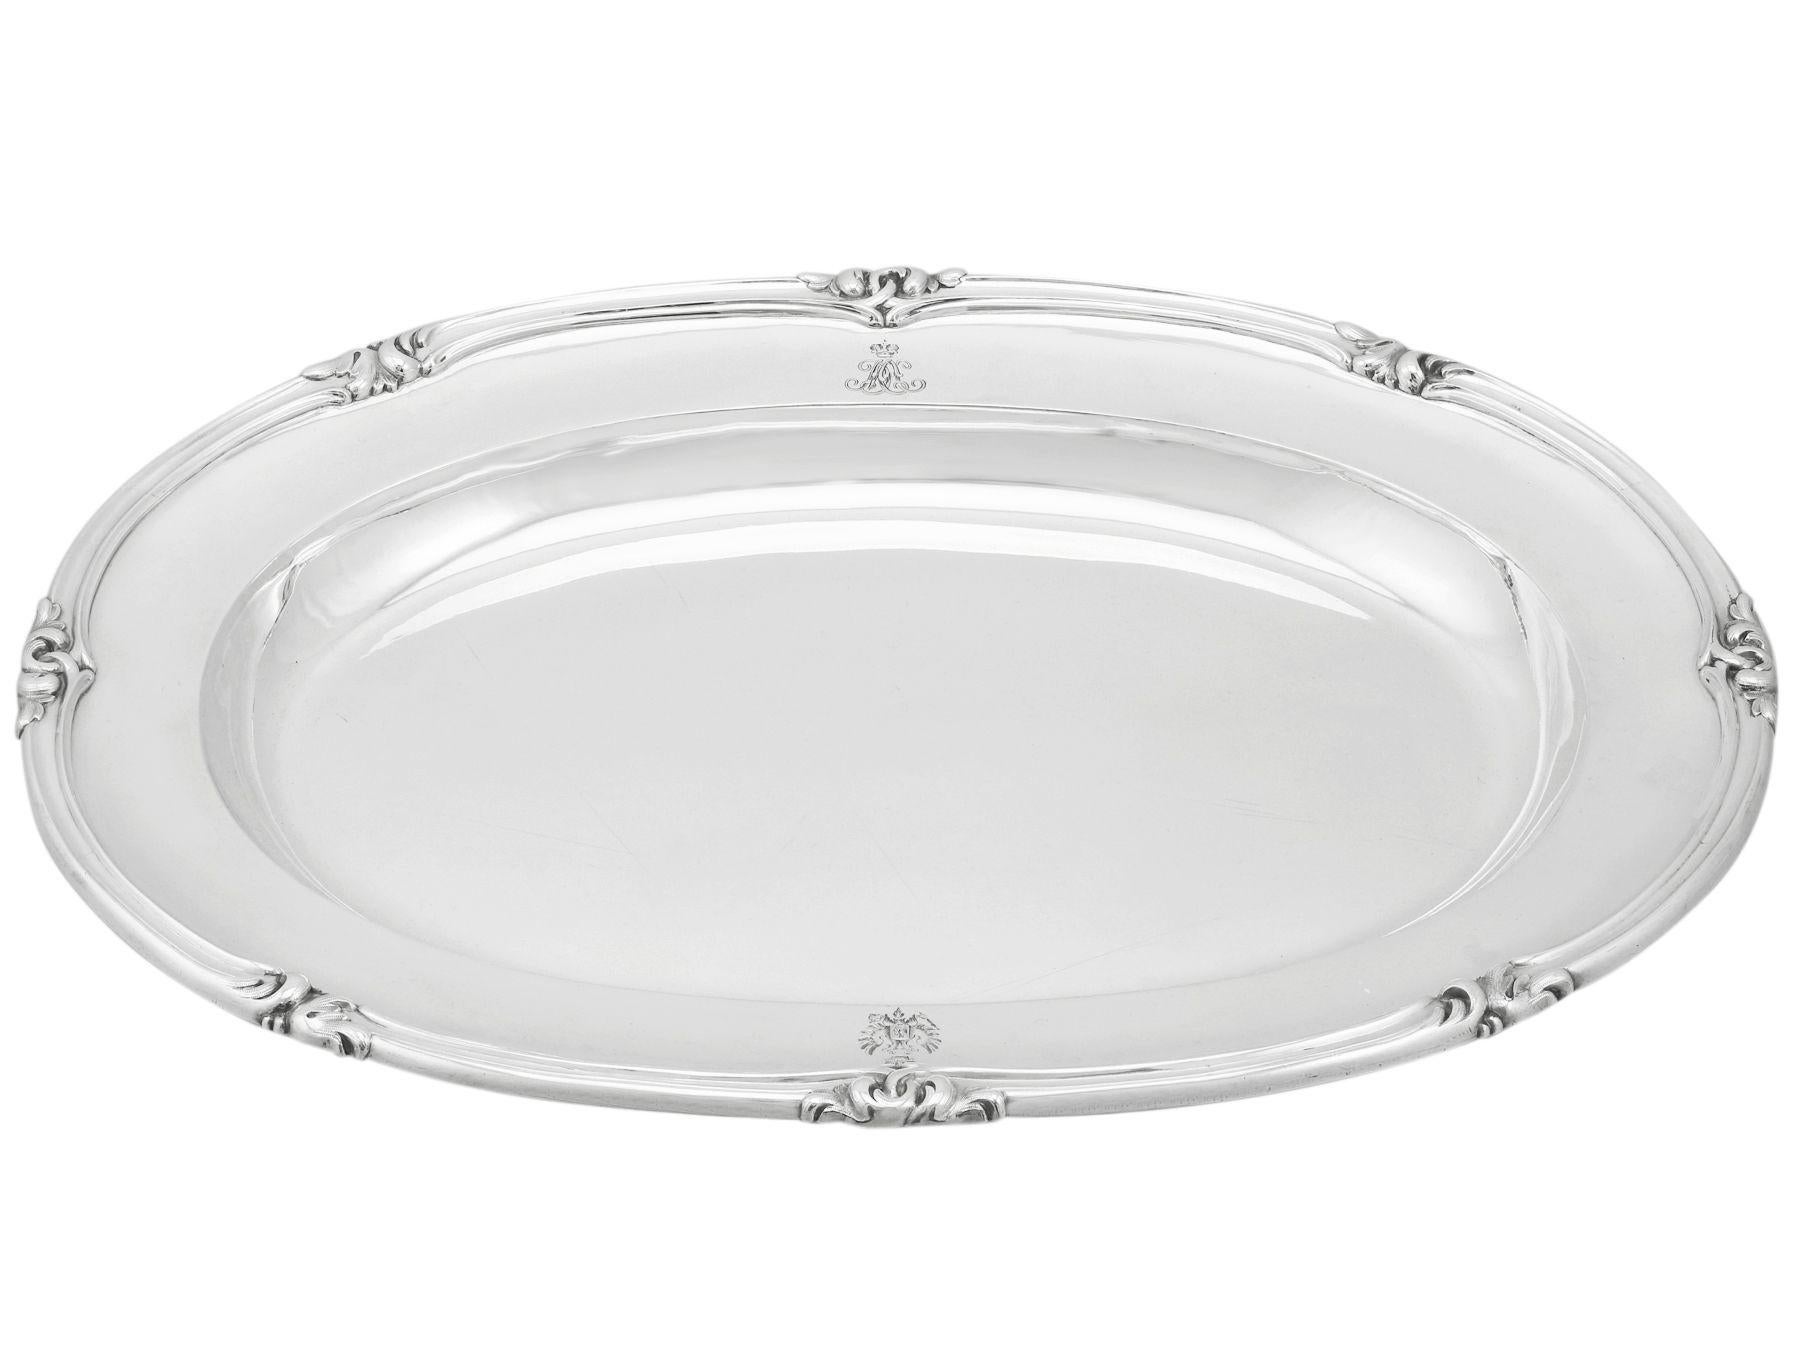 A magnificent, fine and impressive set of three antique Russian silver meat platters; an addition to our dining silverware collection

These magnificent antique Russian silver meat platters has an oval incurved shaped form with a sunken plain oval